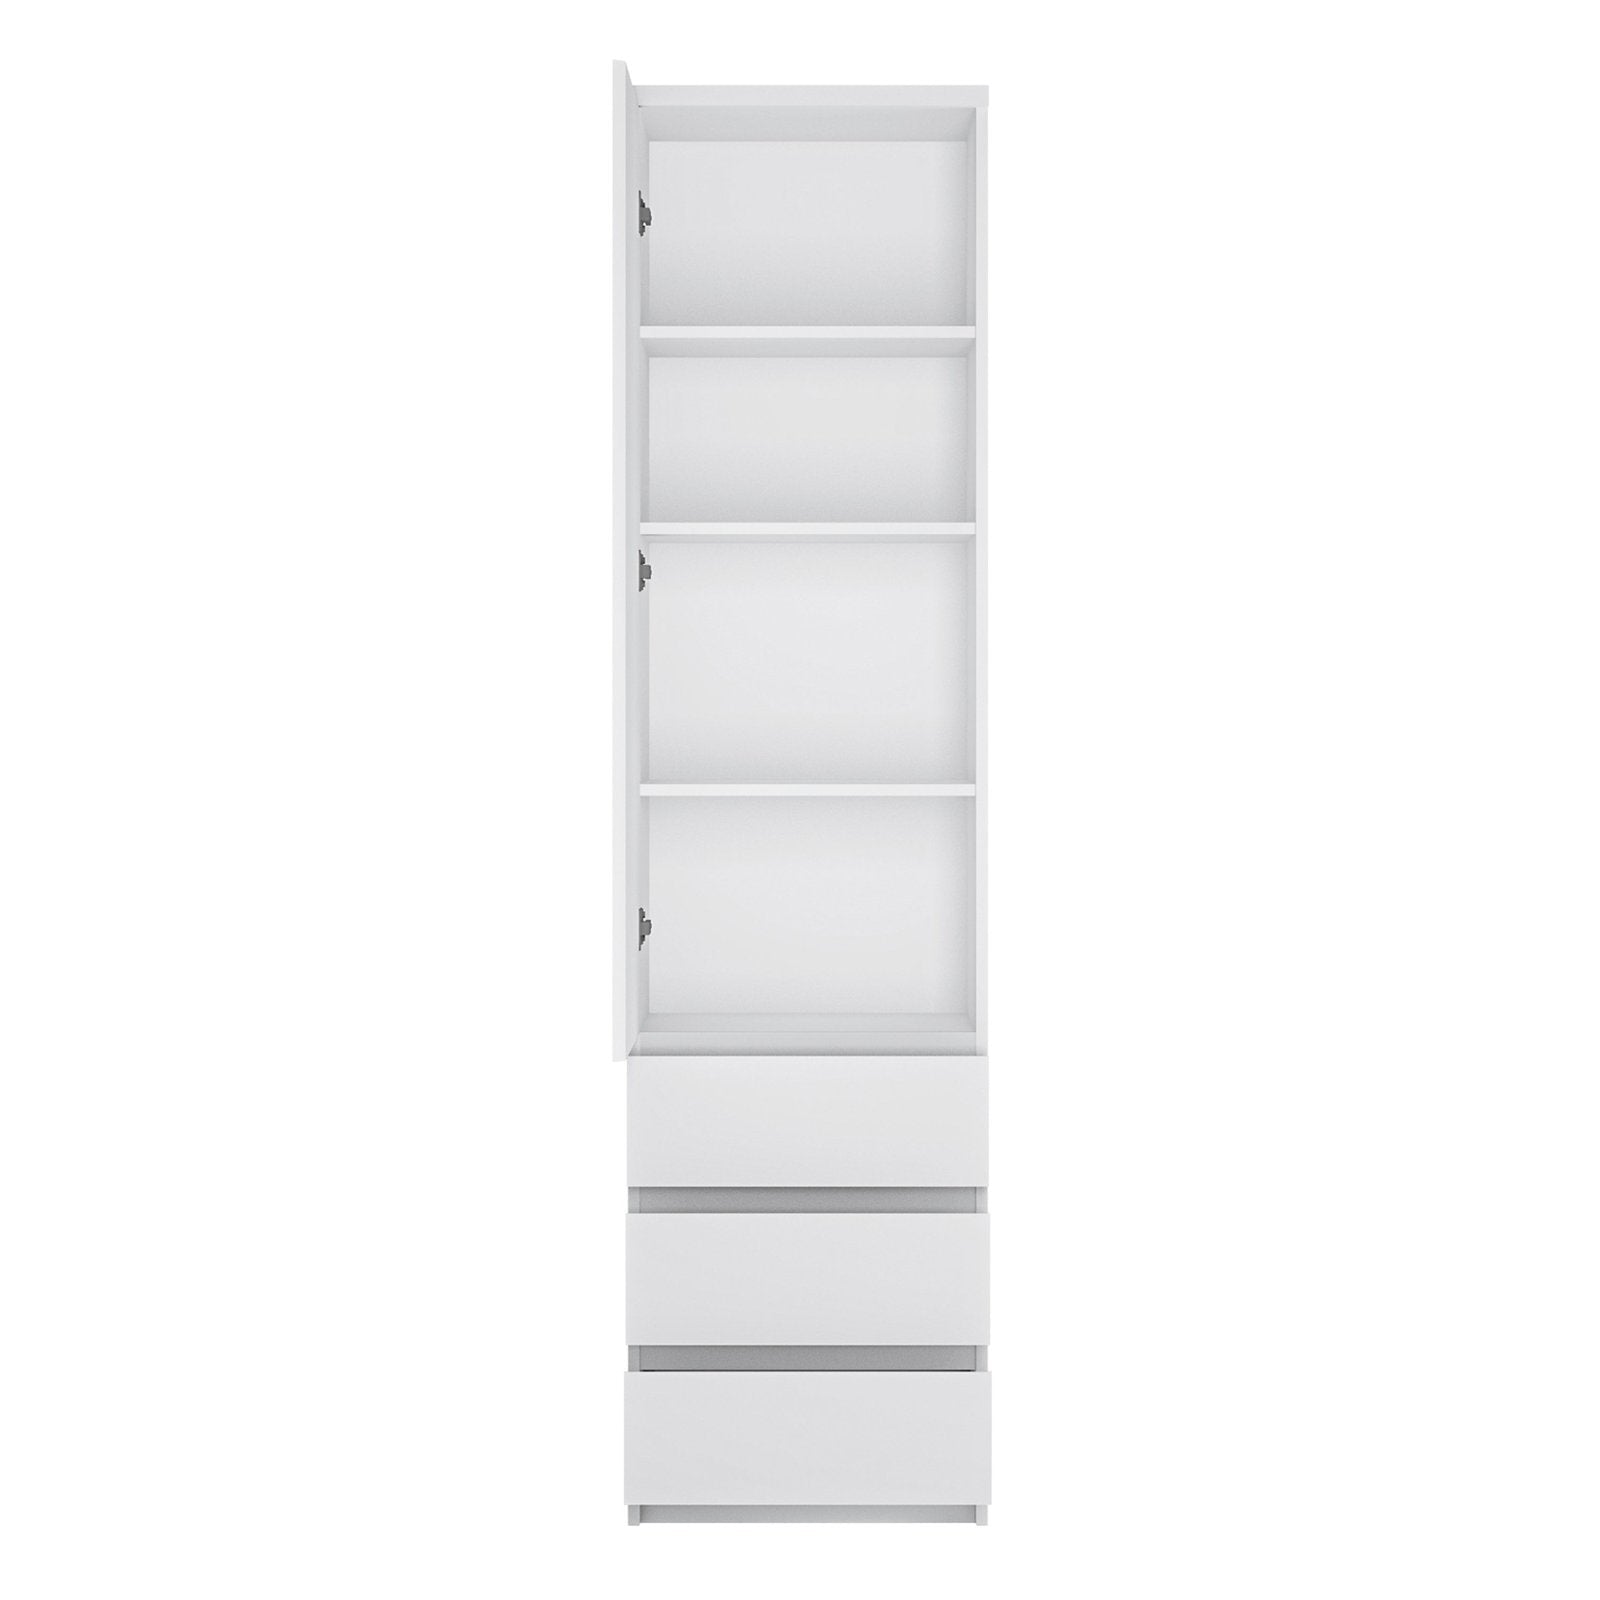 Fribo Tall Narrow with 1 Door 3 Drawer Cupboard